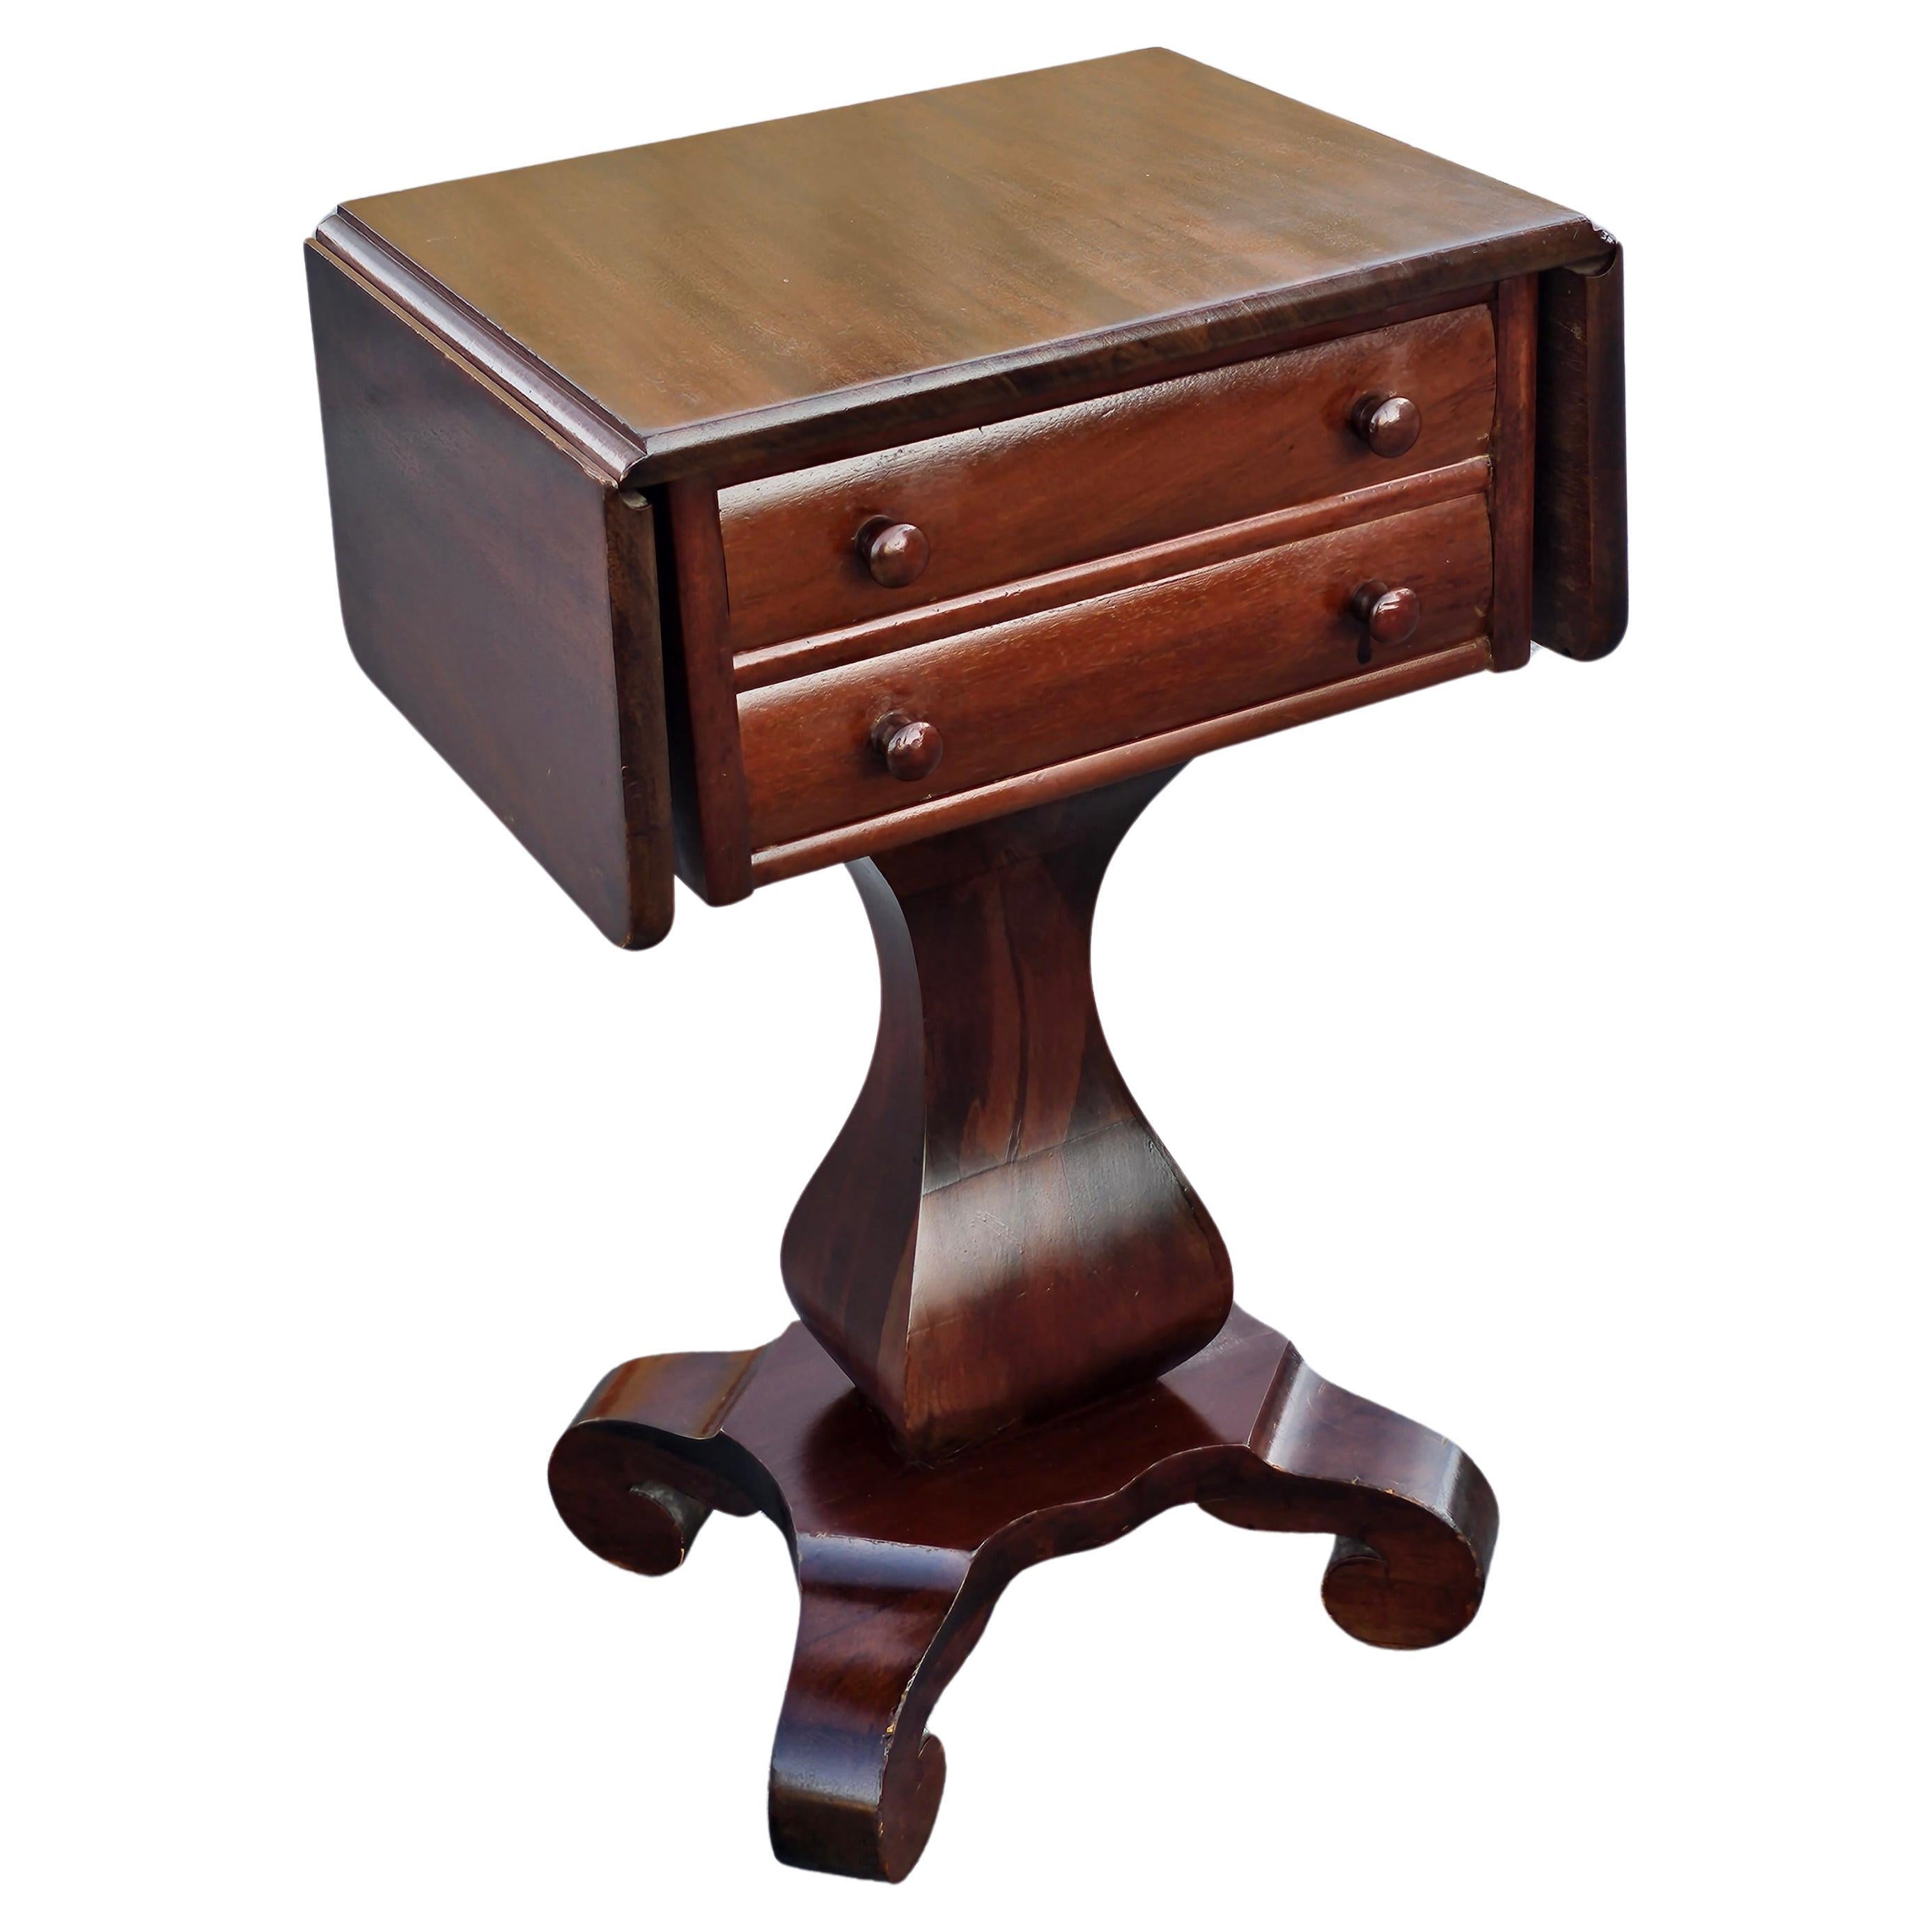 Early 20th Century American Empire Mahogany Drop Leaf Side Table By Imperial 